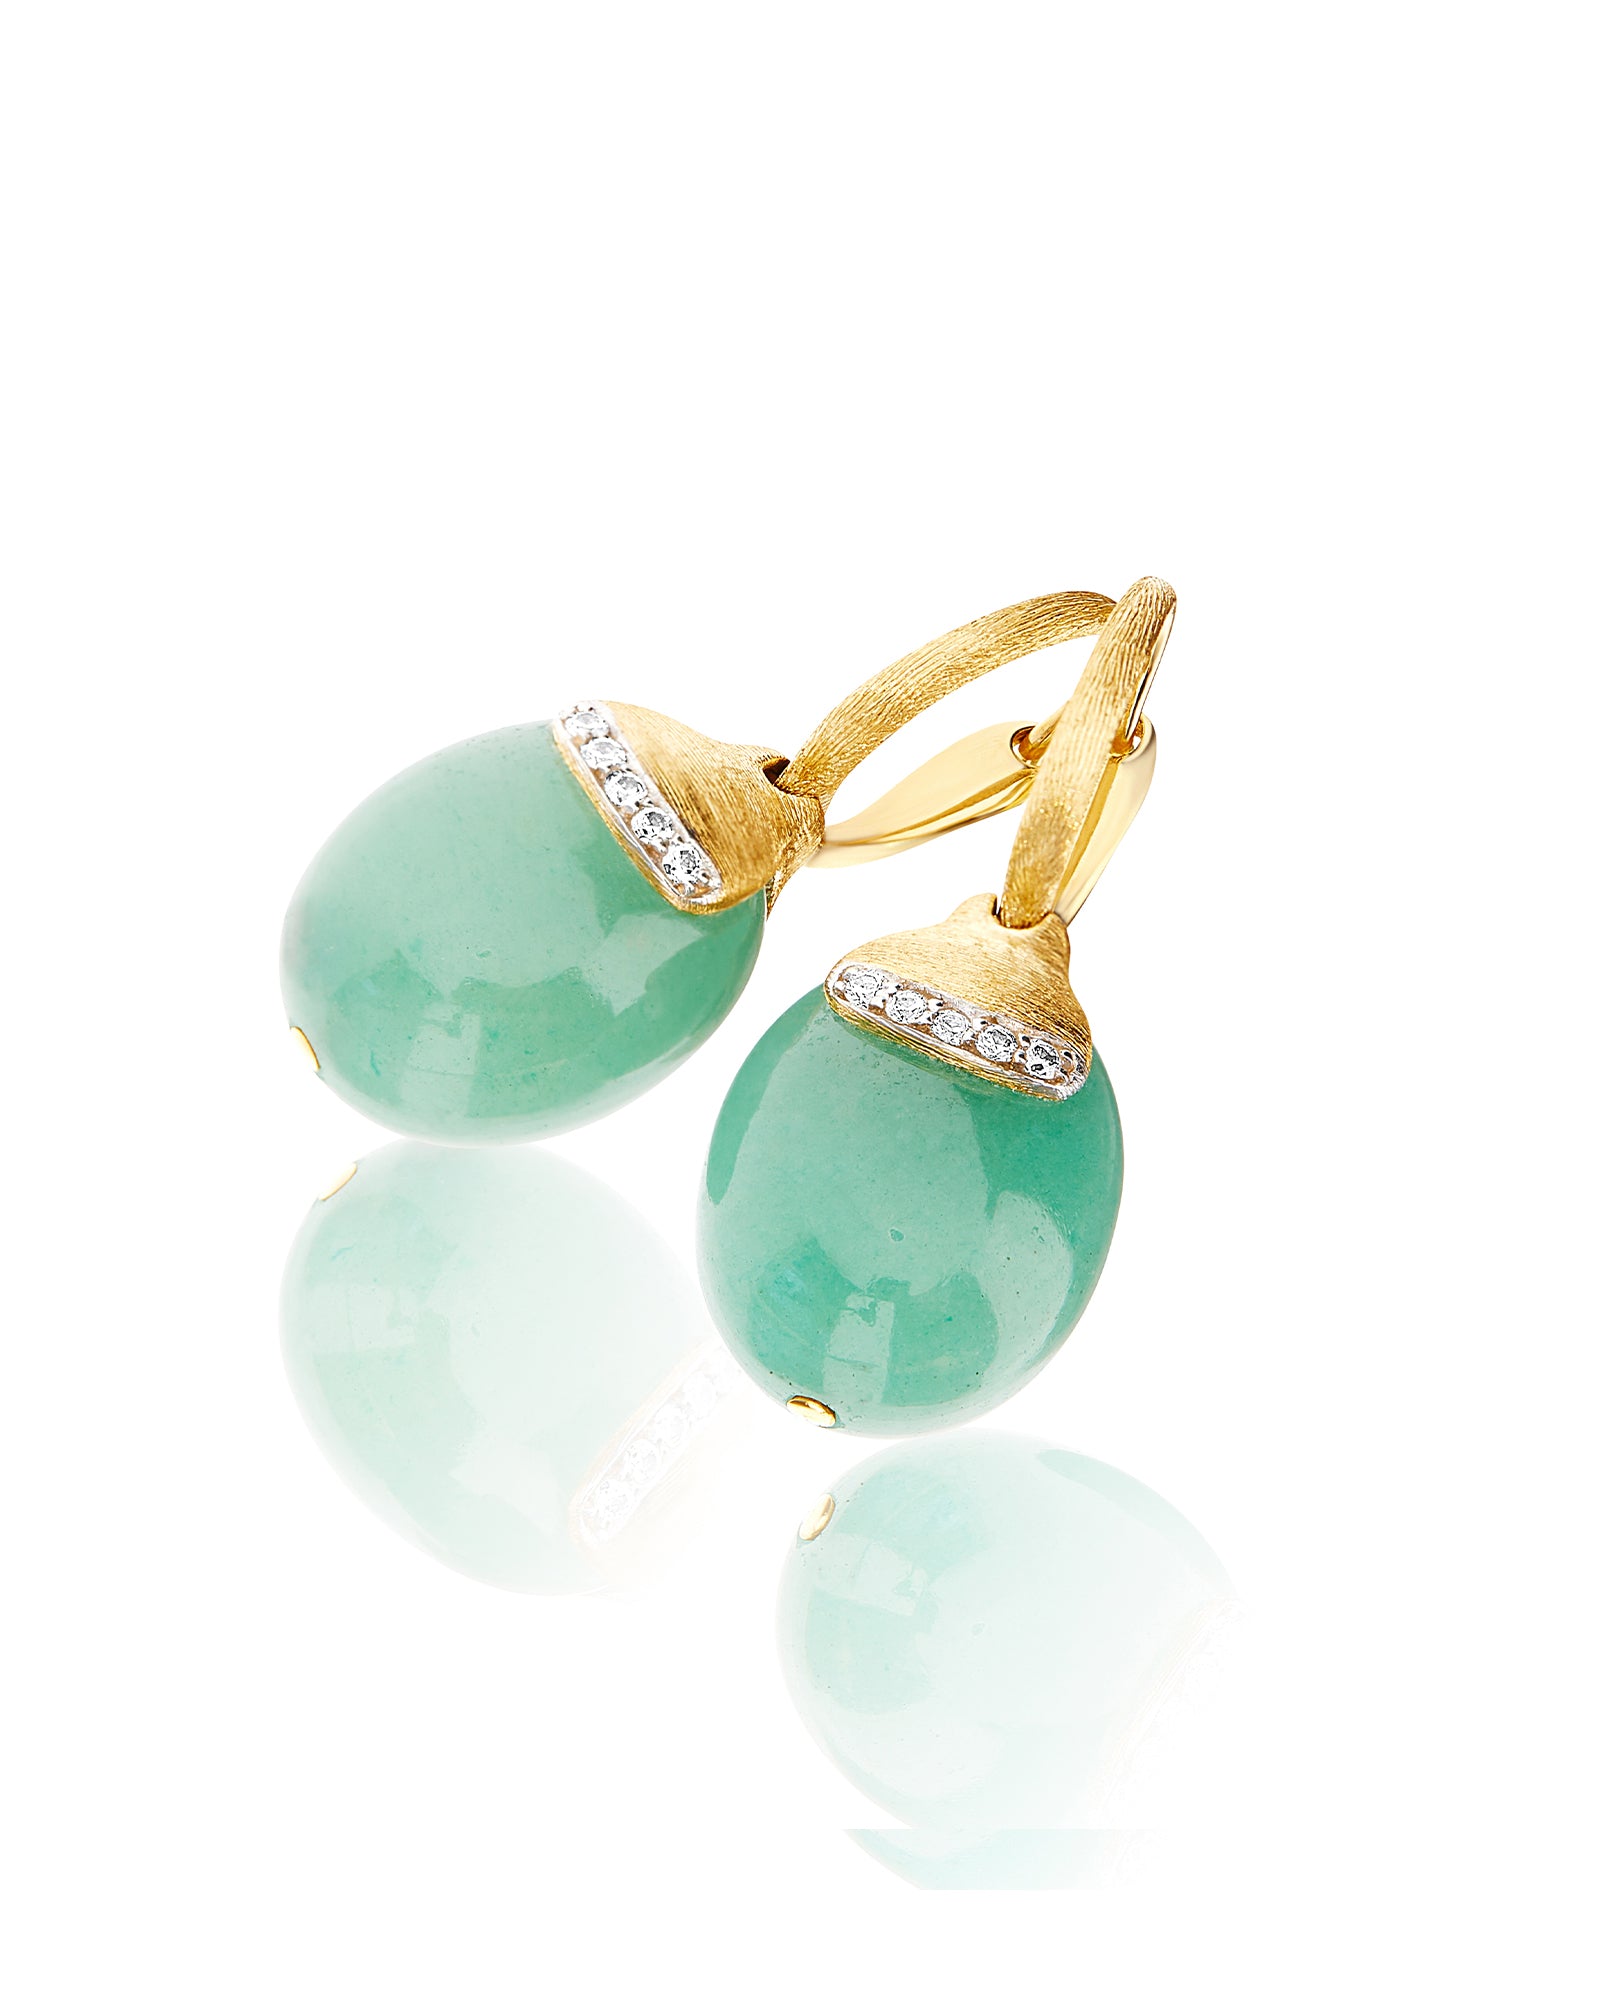 "Amazonia" Ciliegine Gold and Green Aventurine Ball Drop Earrings with Diamonds Details (LARGE)